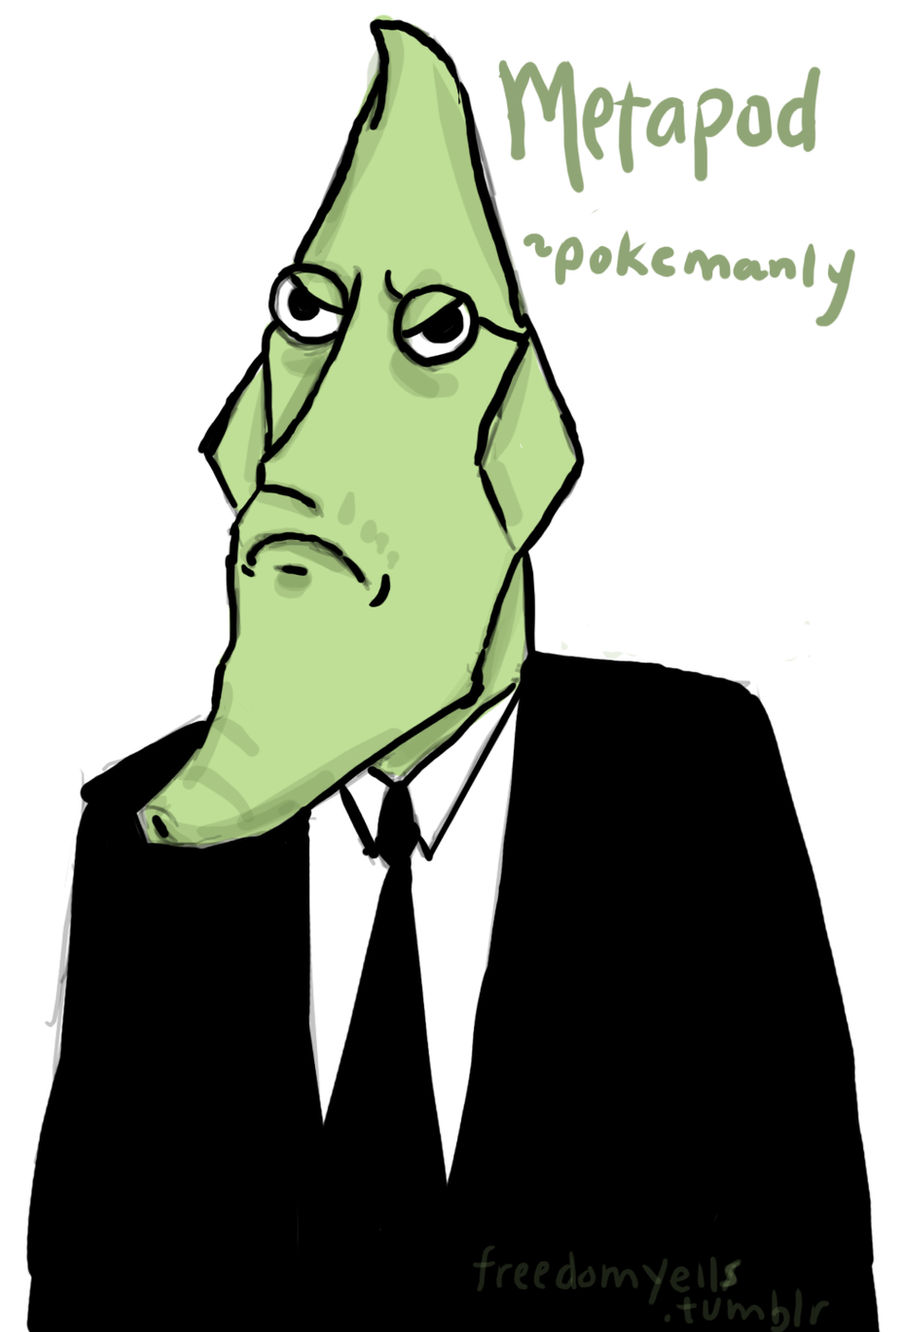 MANLY METAPOD